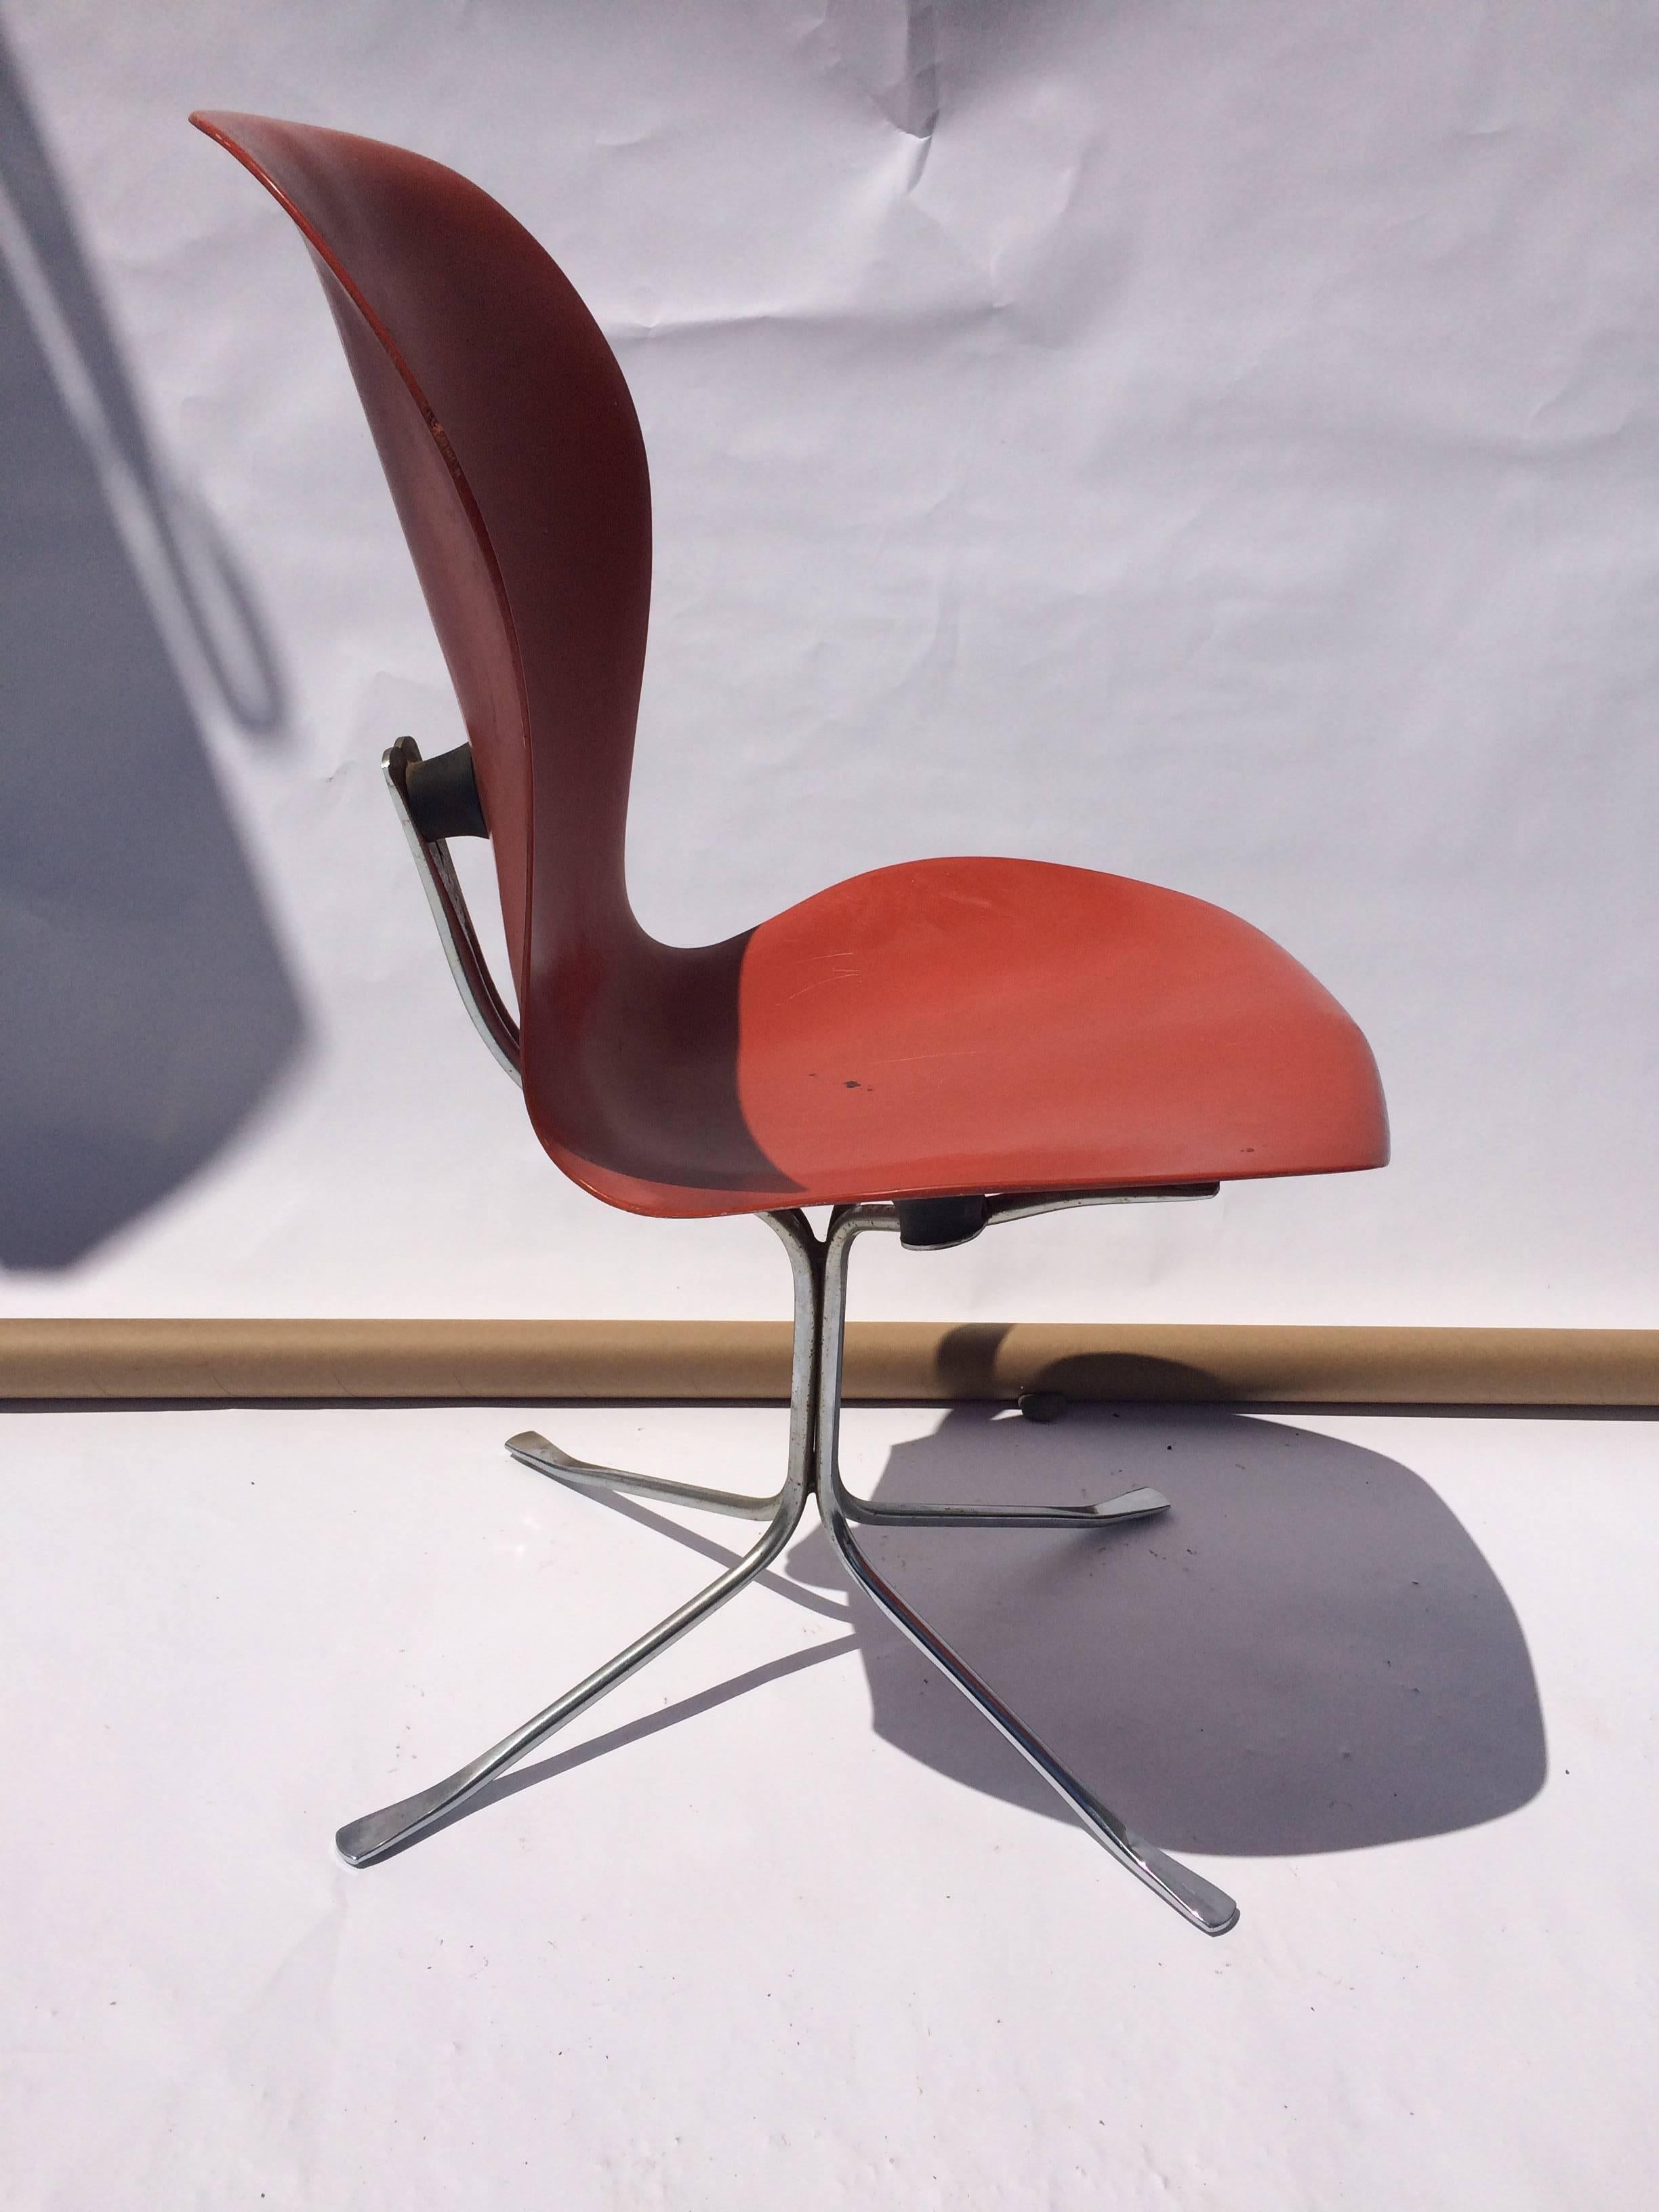 Ion Chair by Gideon Kramer In Fair Condition For Sale In Germantown, NY